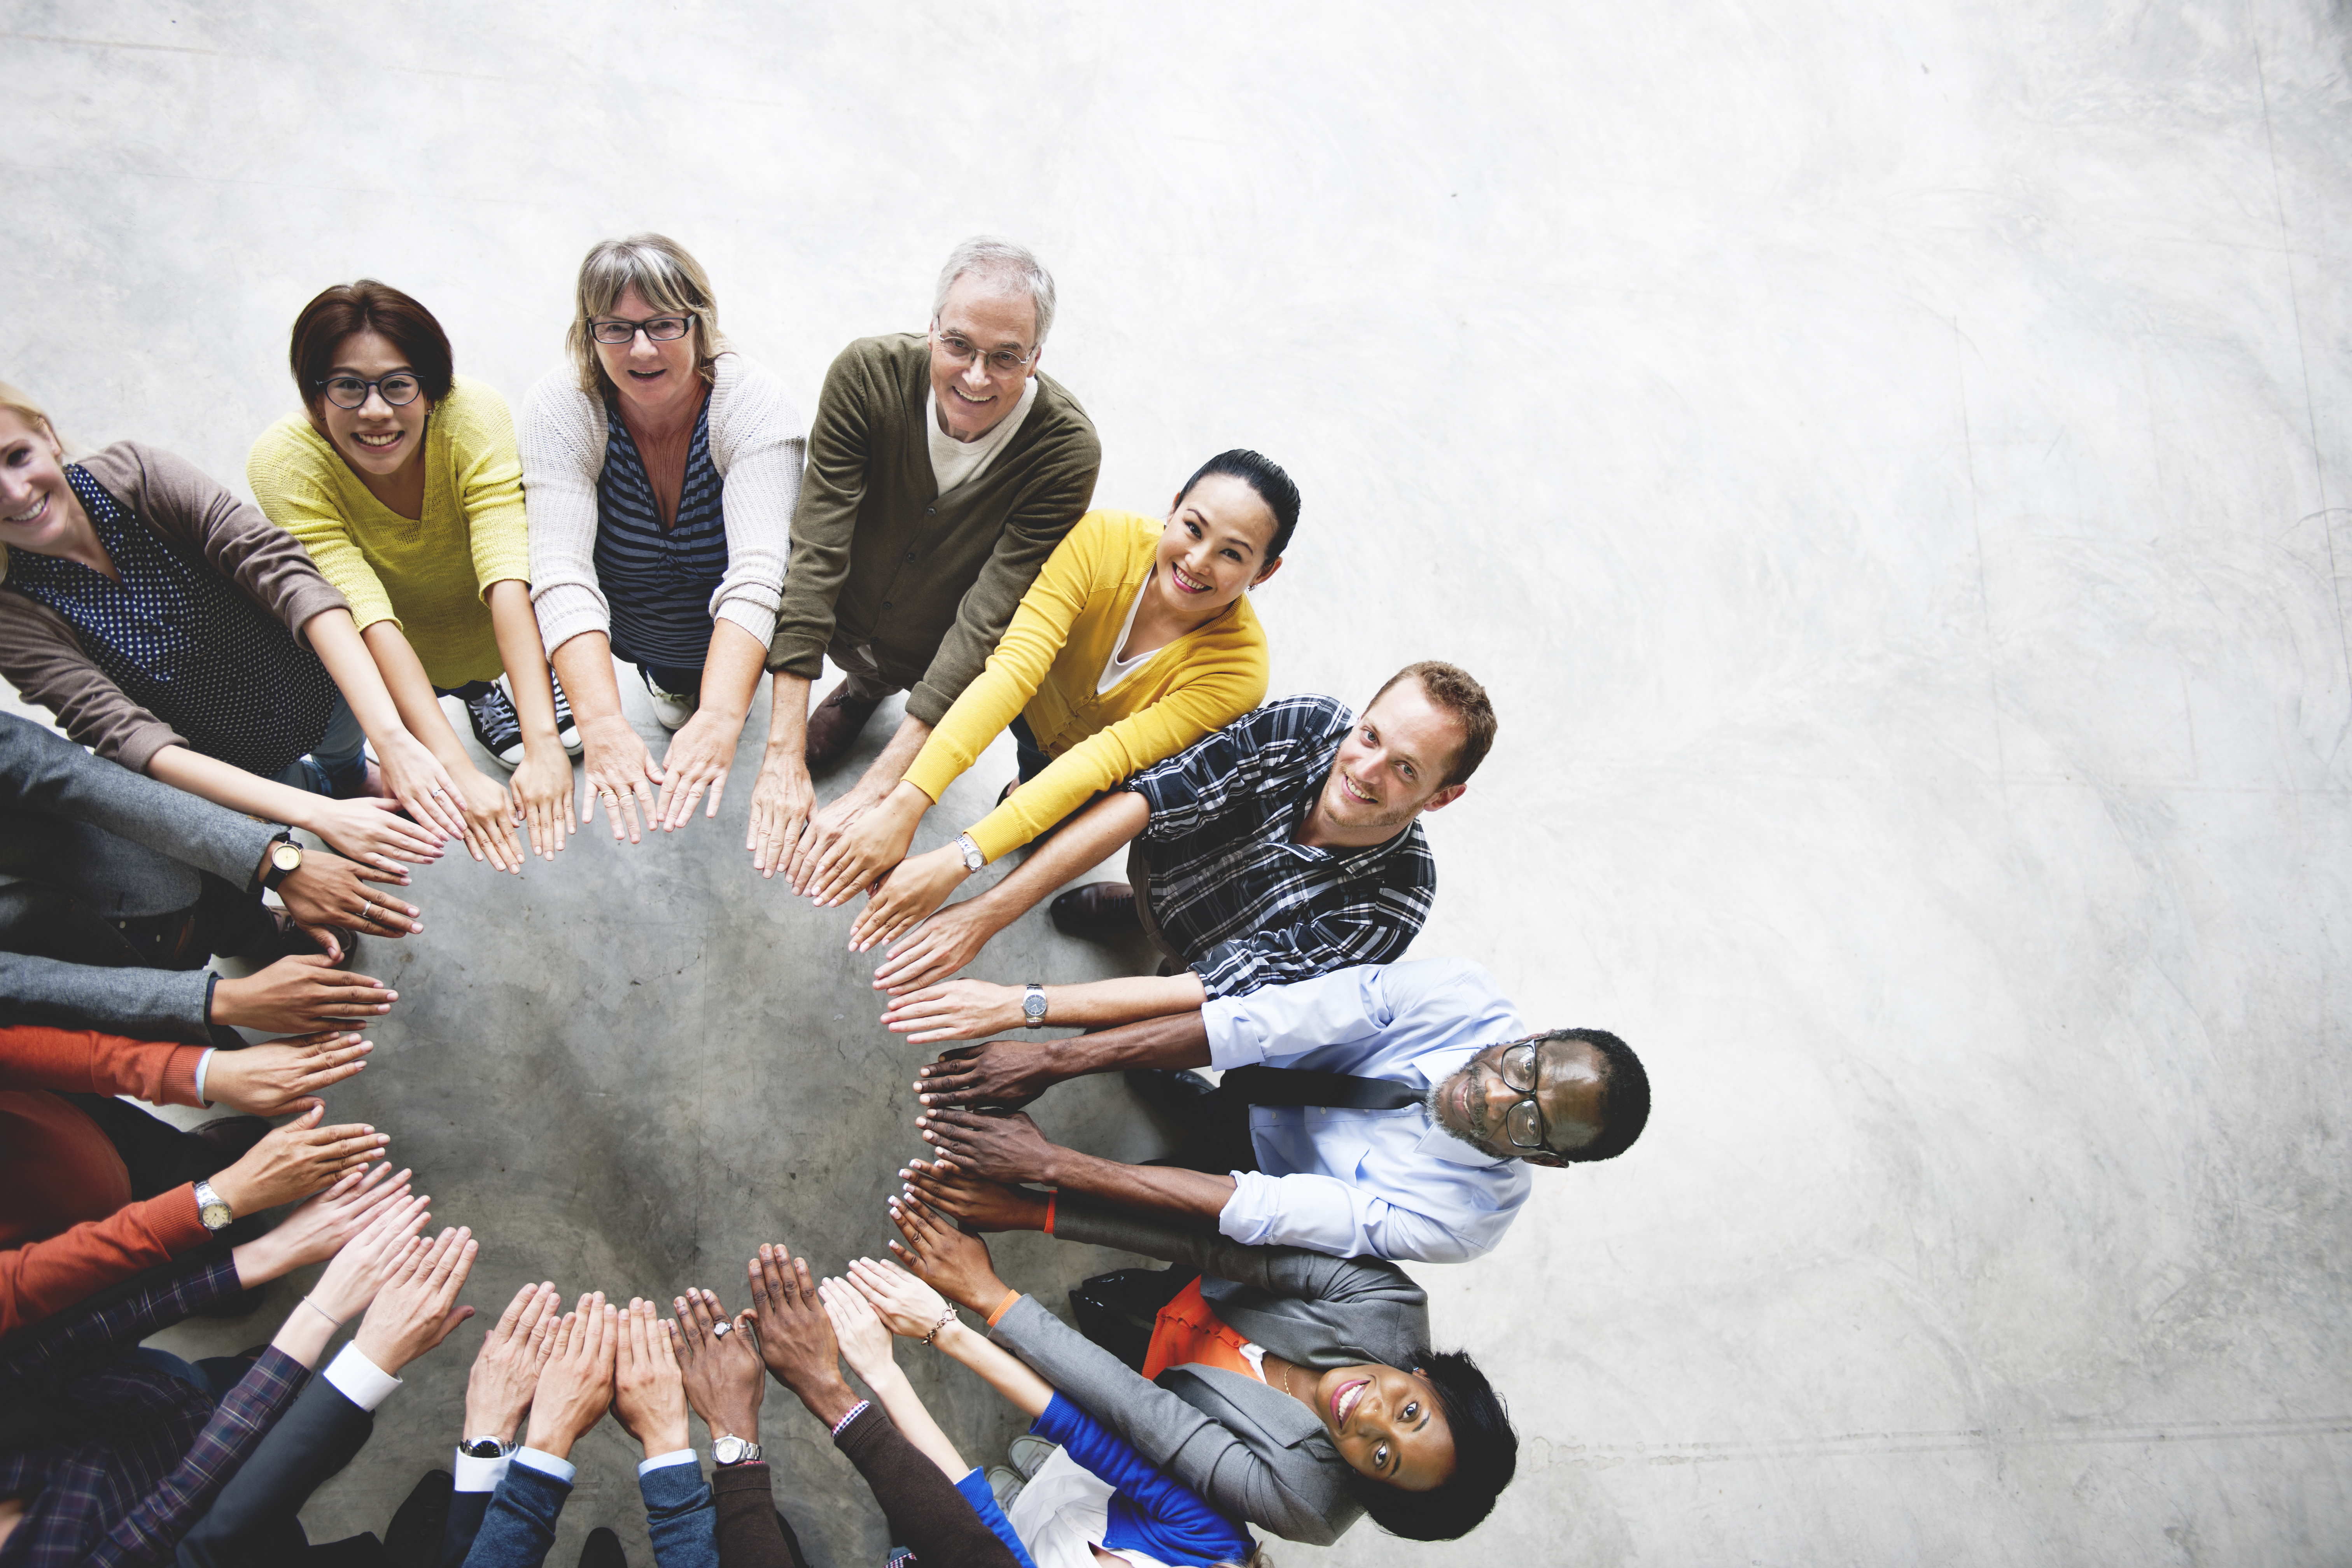 4 Important Ways to Increase Diversity and Inclusion in the Workplace